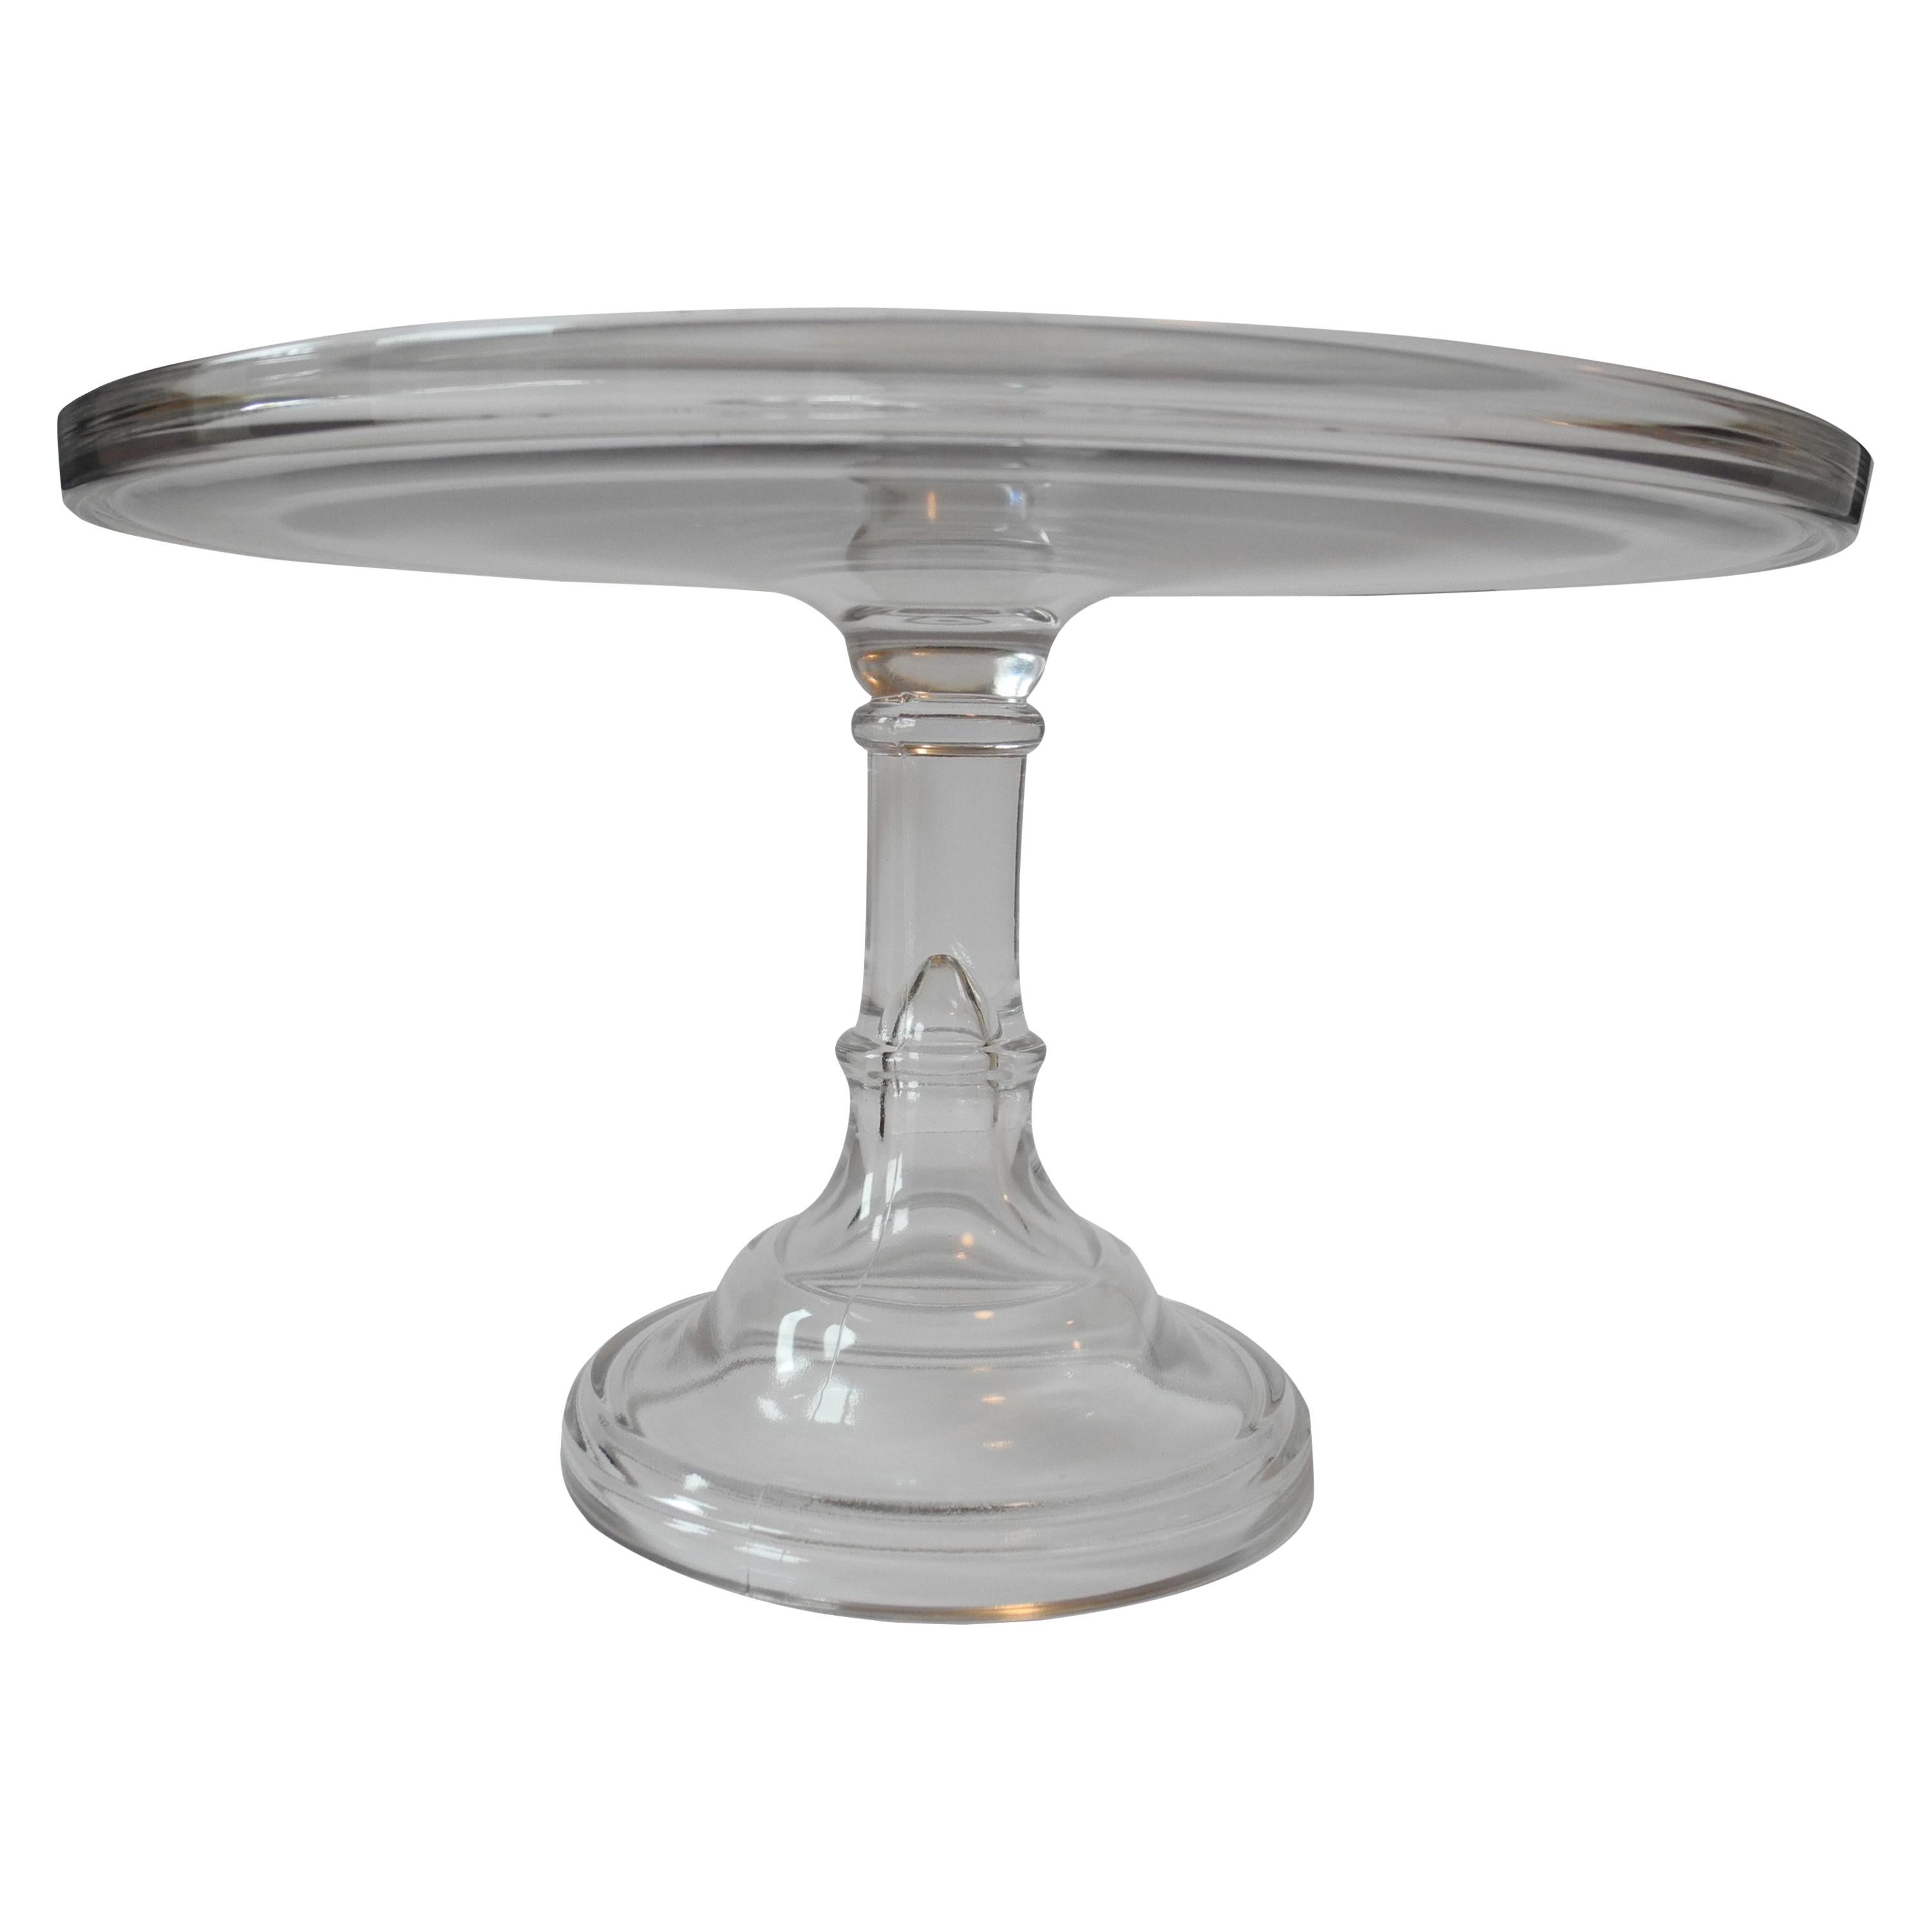 Early 20th Century Large Pressed Glass Cake Stand / Table Center Piece For Sale